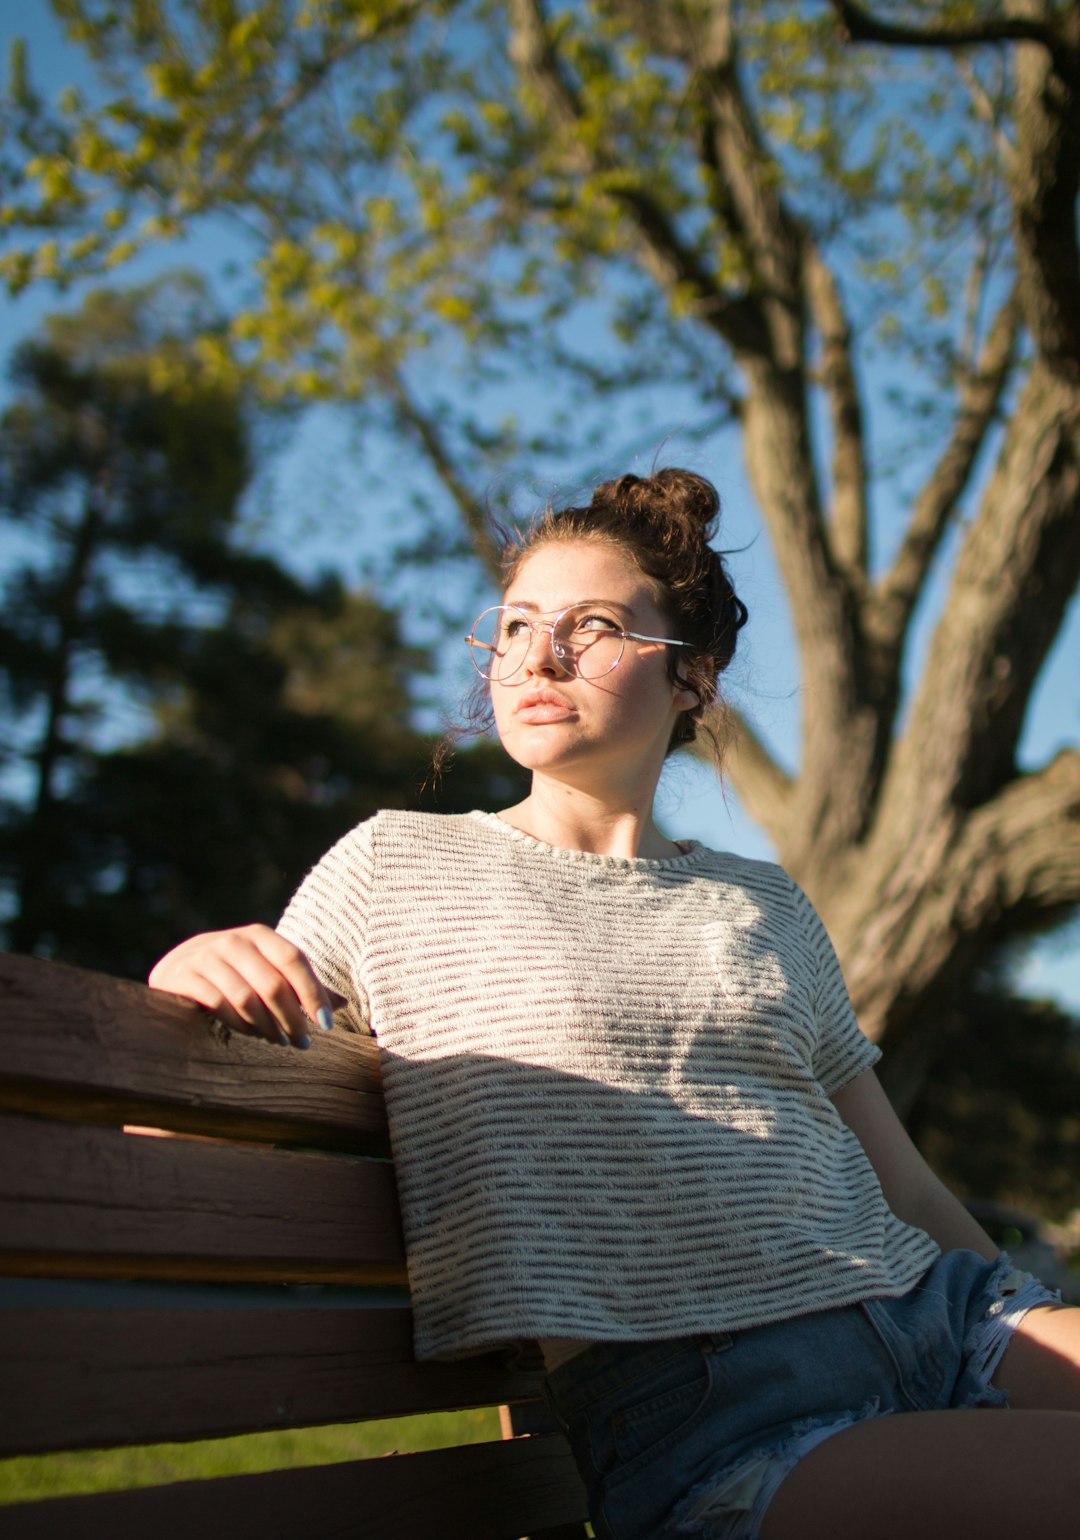 selective focus photography of girl sitting on bench during daytime